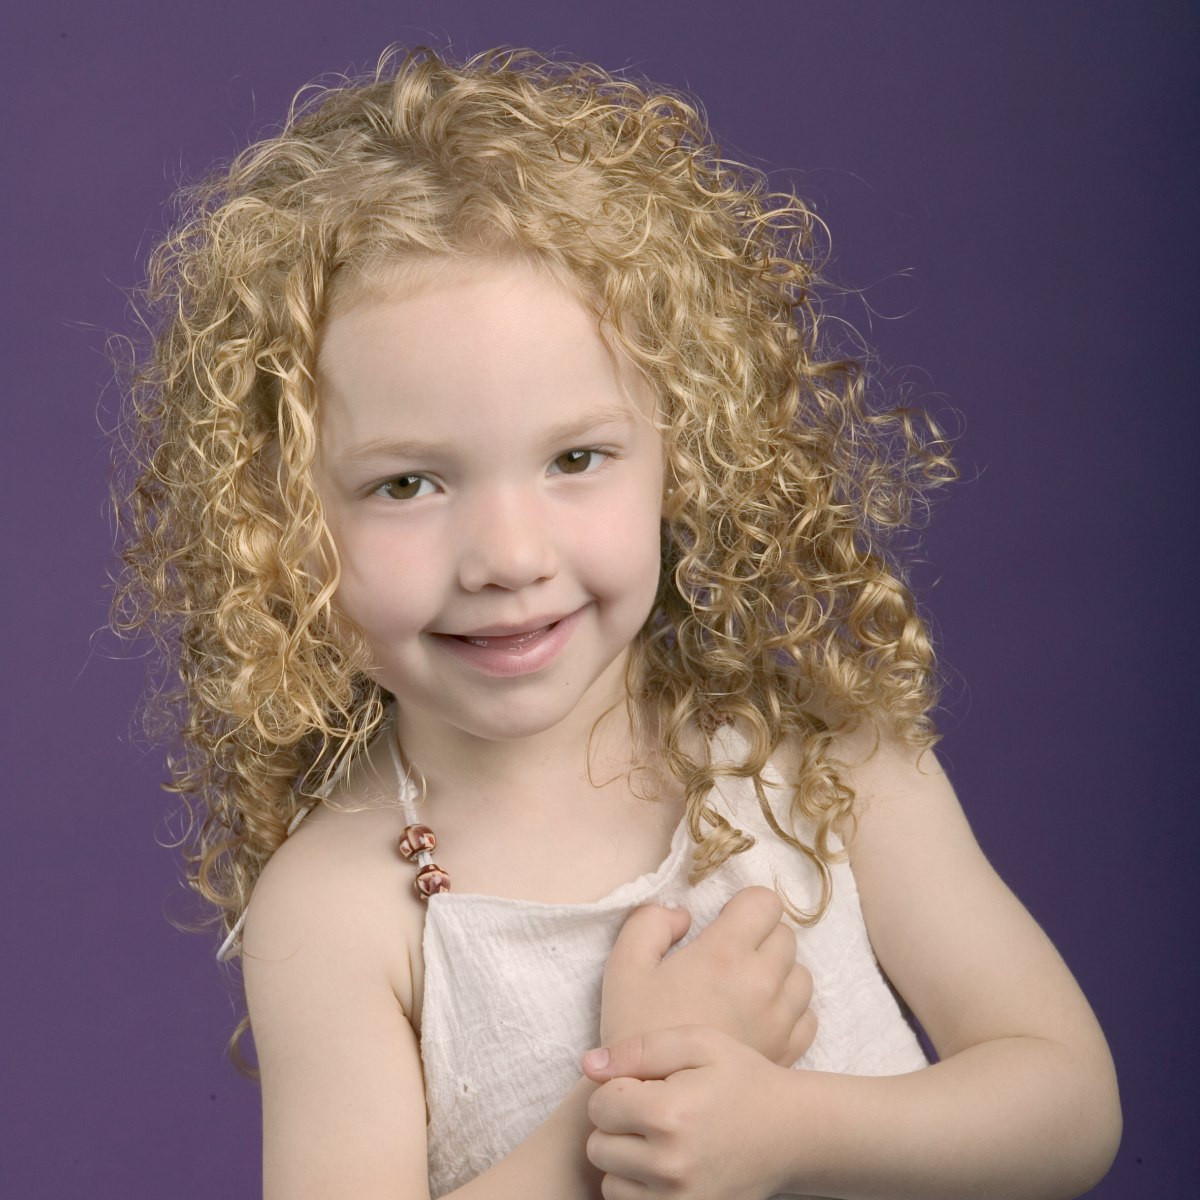 Short Haircuts For Little Girls With Curly Hair
 Spiraling curls for a little girl